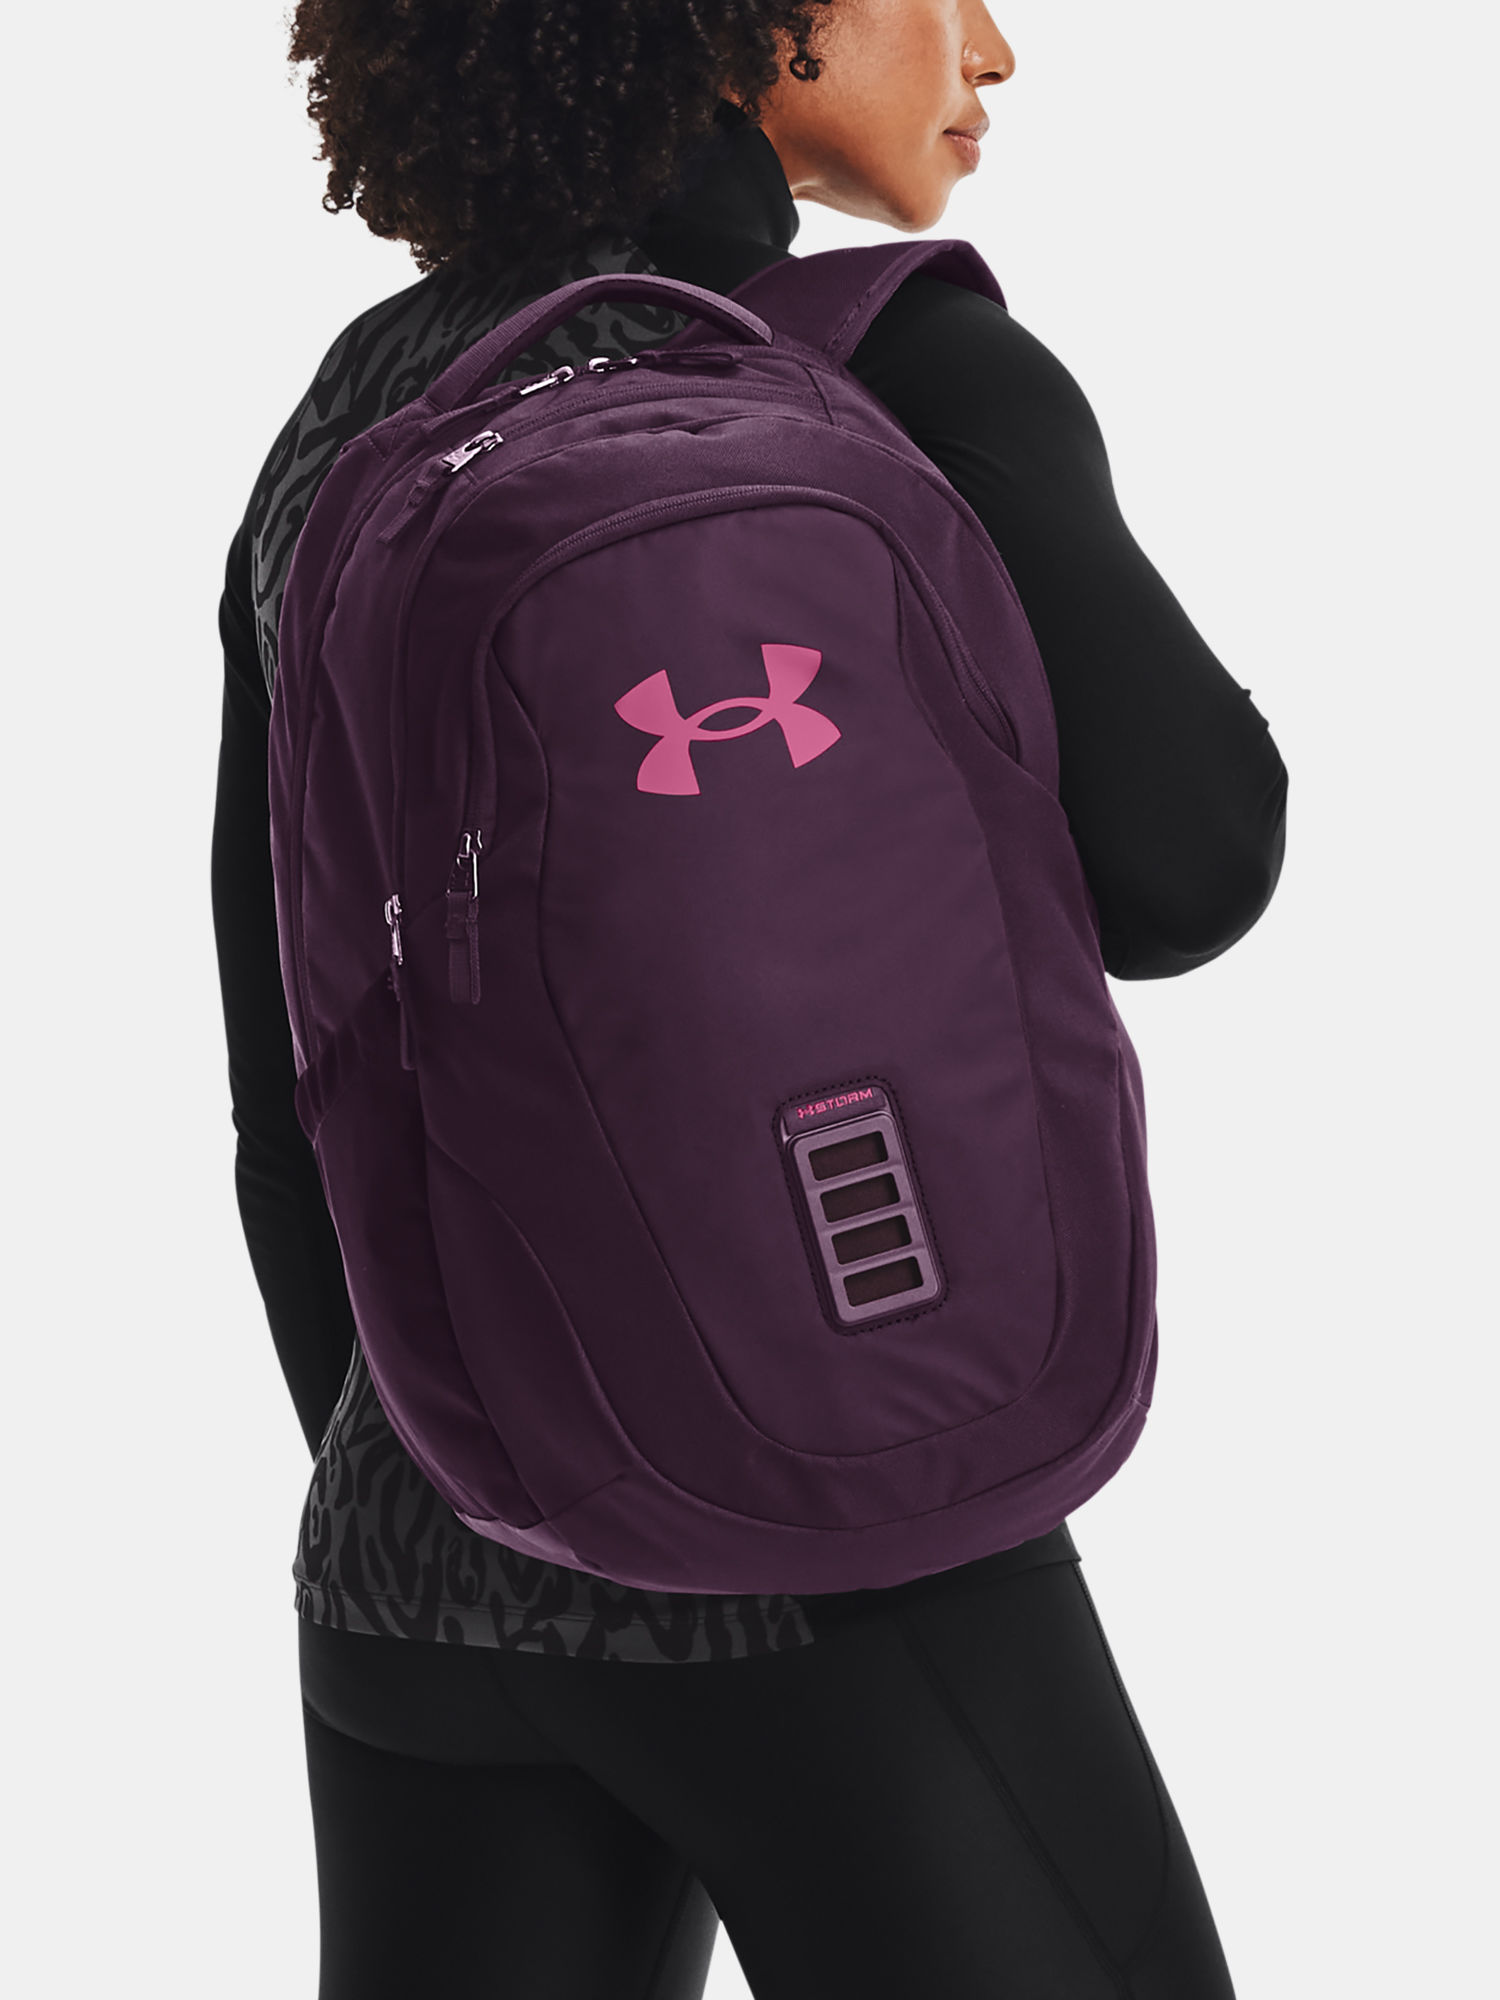 Batoh Under Armour Gameday 2.0 Backpack-PPL (7)